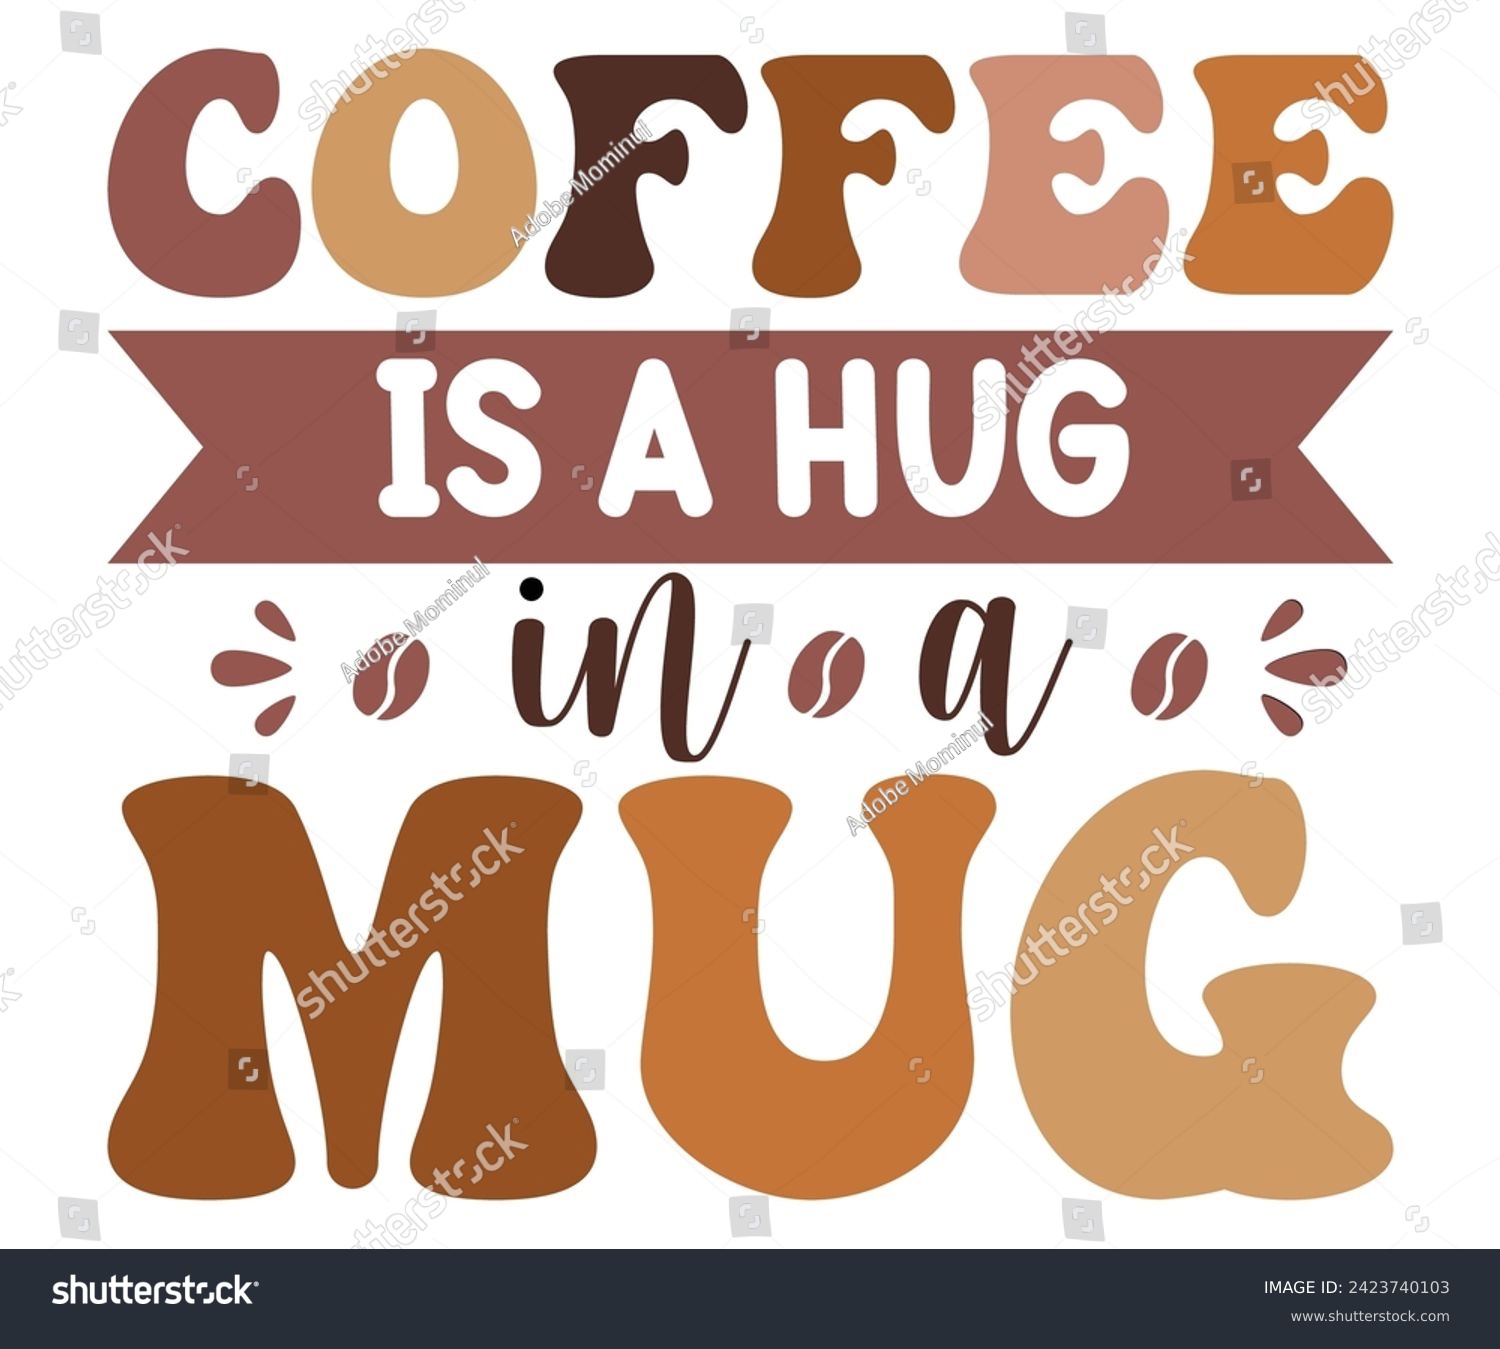 SVG of Coffee Is A Hug In A Mug,Coffee Svg,Coffee Retro,Funny Coffee Sayings,Coffee Mug Svg,Coffee Cup Svg,Gift For Coffee,Coffee Lover,Caffeine Svg,Svg Cut File,Coffee Quotes,Sublimation Design, svg